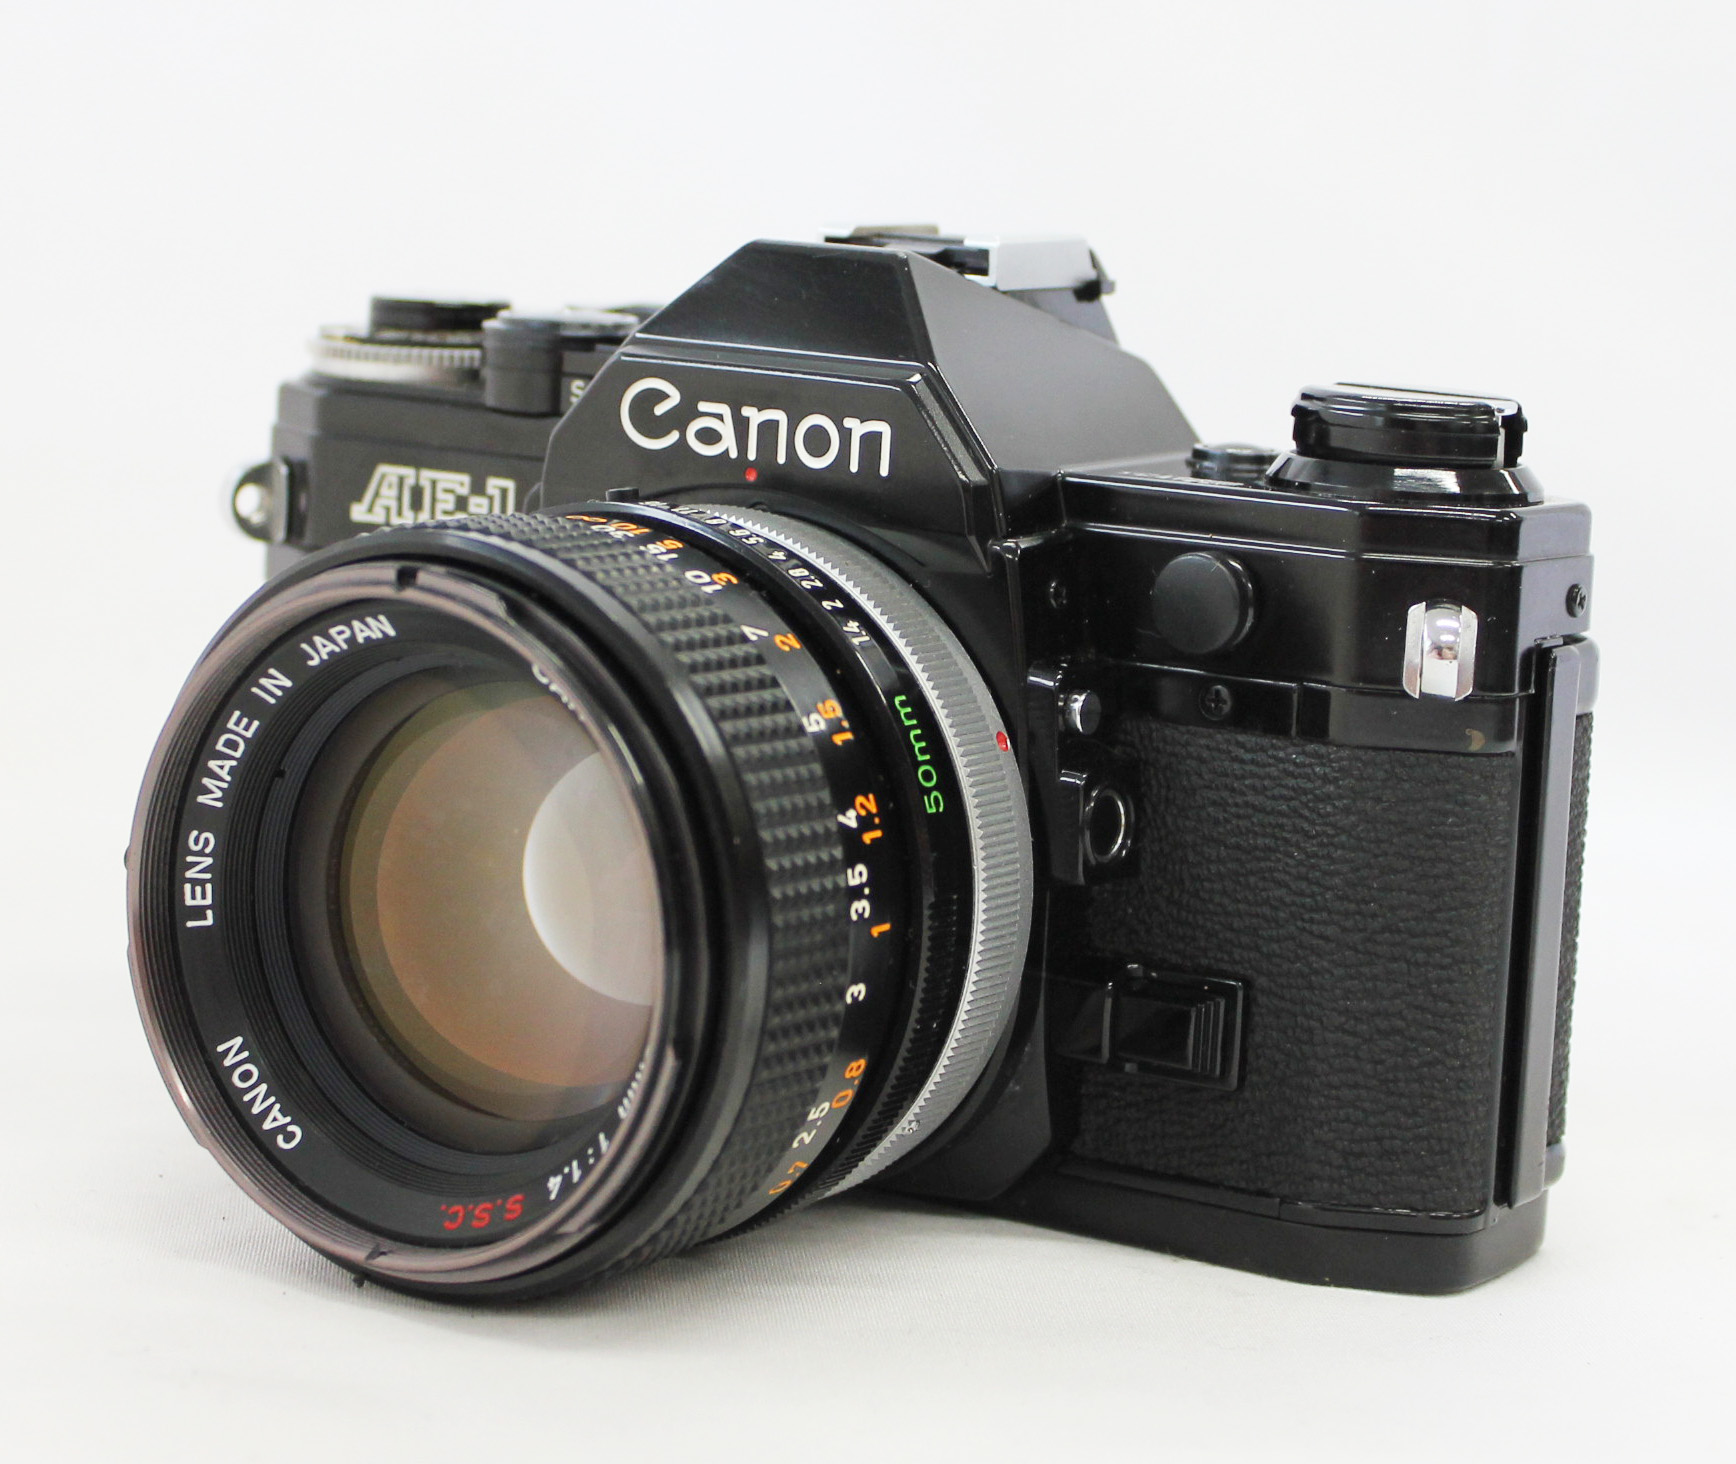 Japan Used Camera Shop | [Exc+++] Canon AE-1 35mm SLR Camera with FD 50mm F/1.4 S.S.C. Lens from Japan